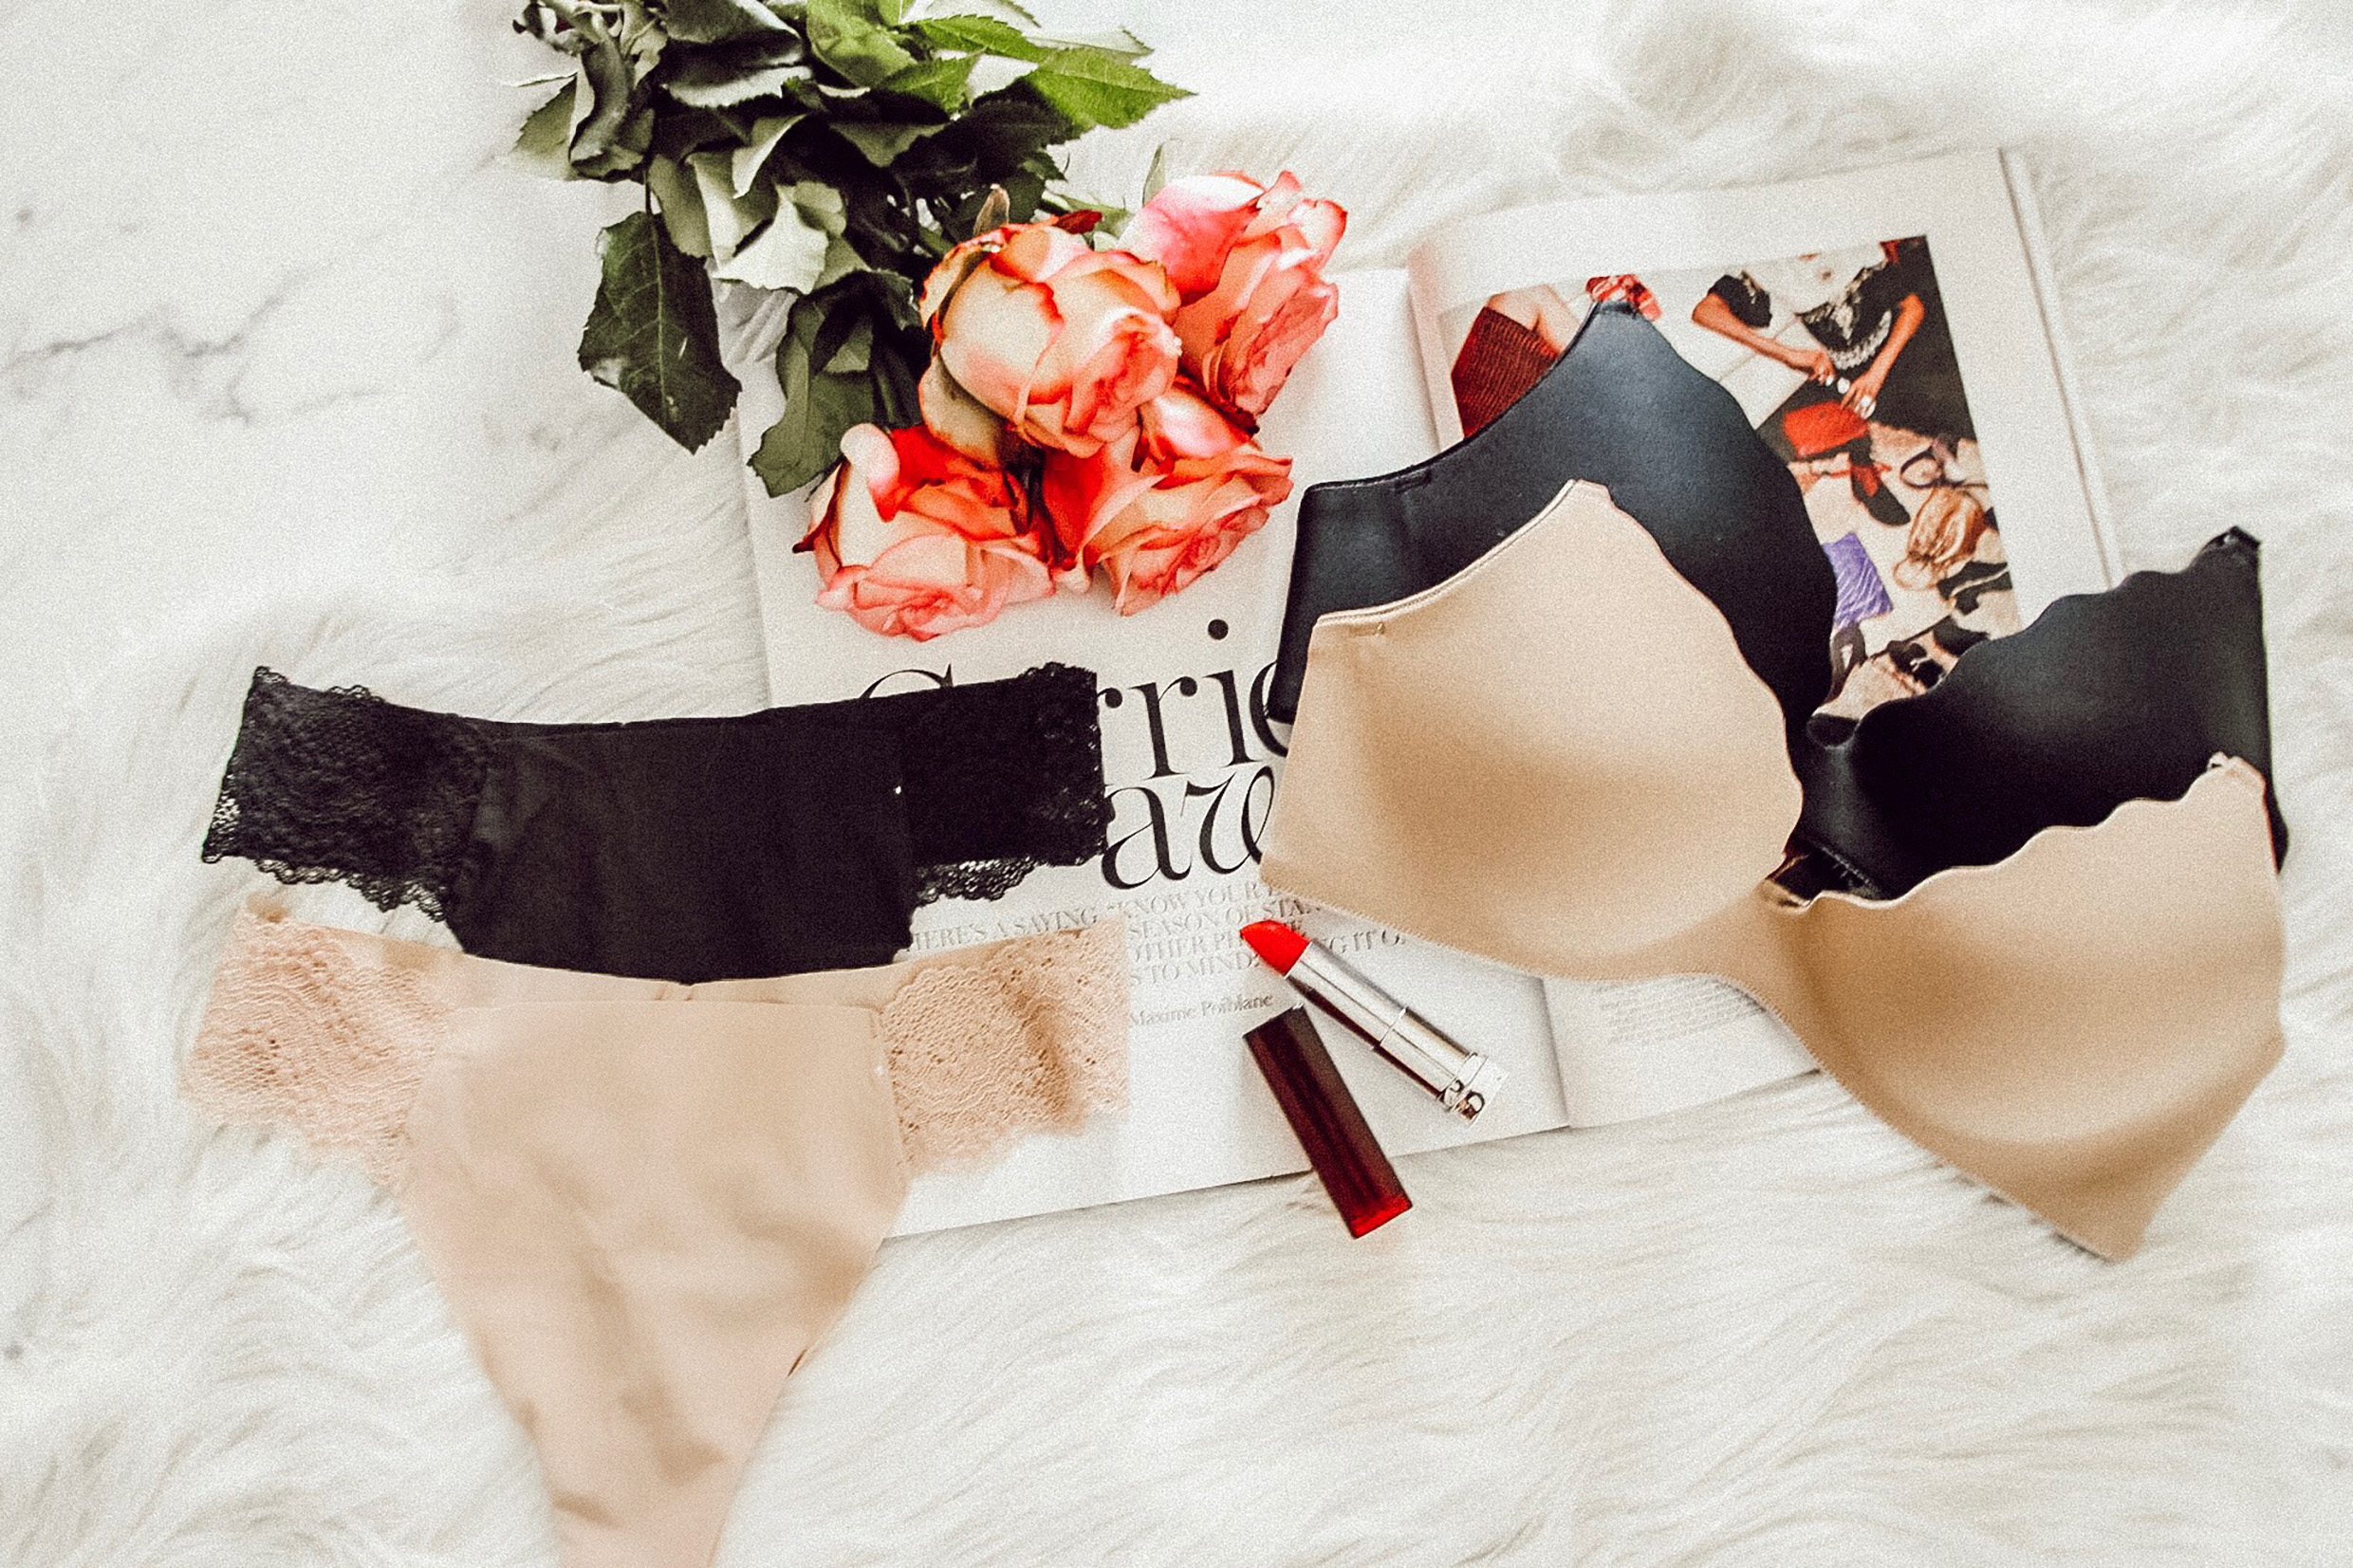 Alena Gidenko of todarpints.com shares her favorite bra and panties and how important it is to find the perfect, comfy fit